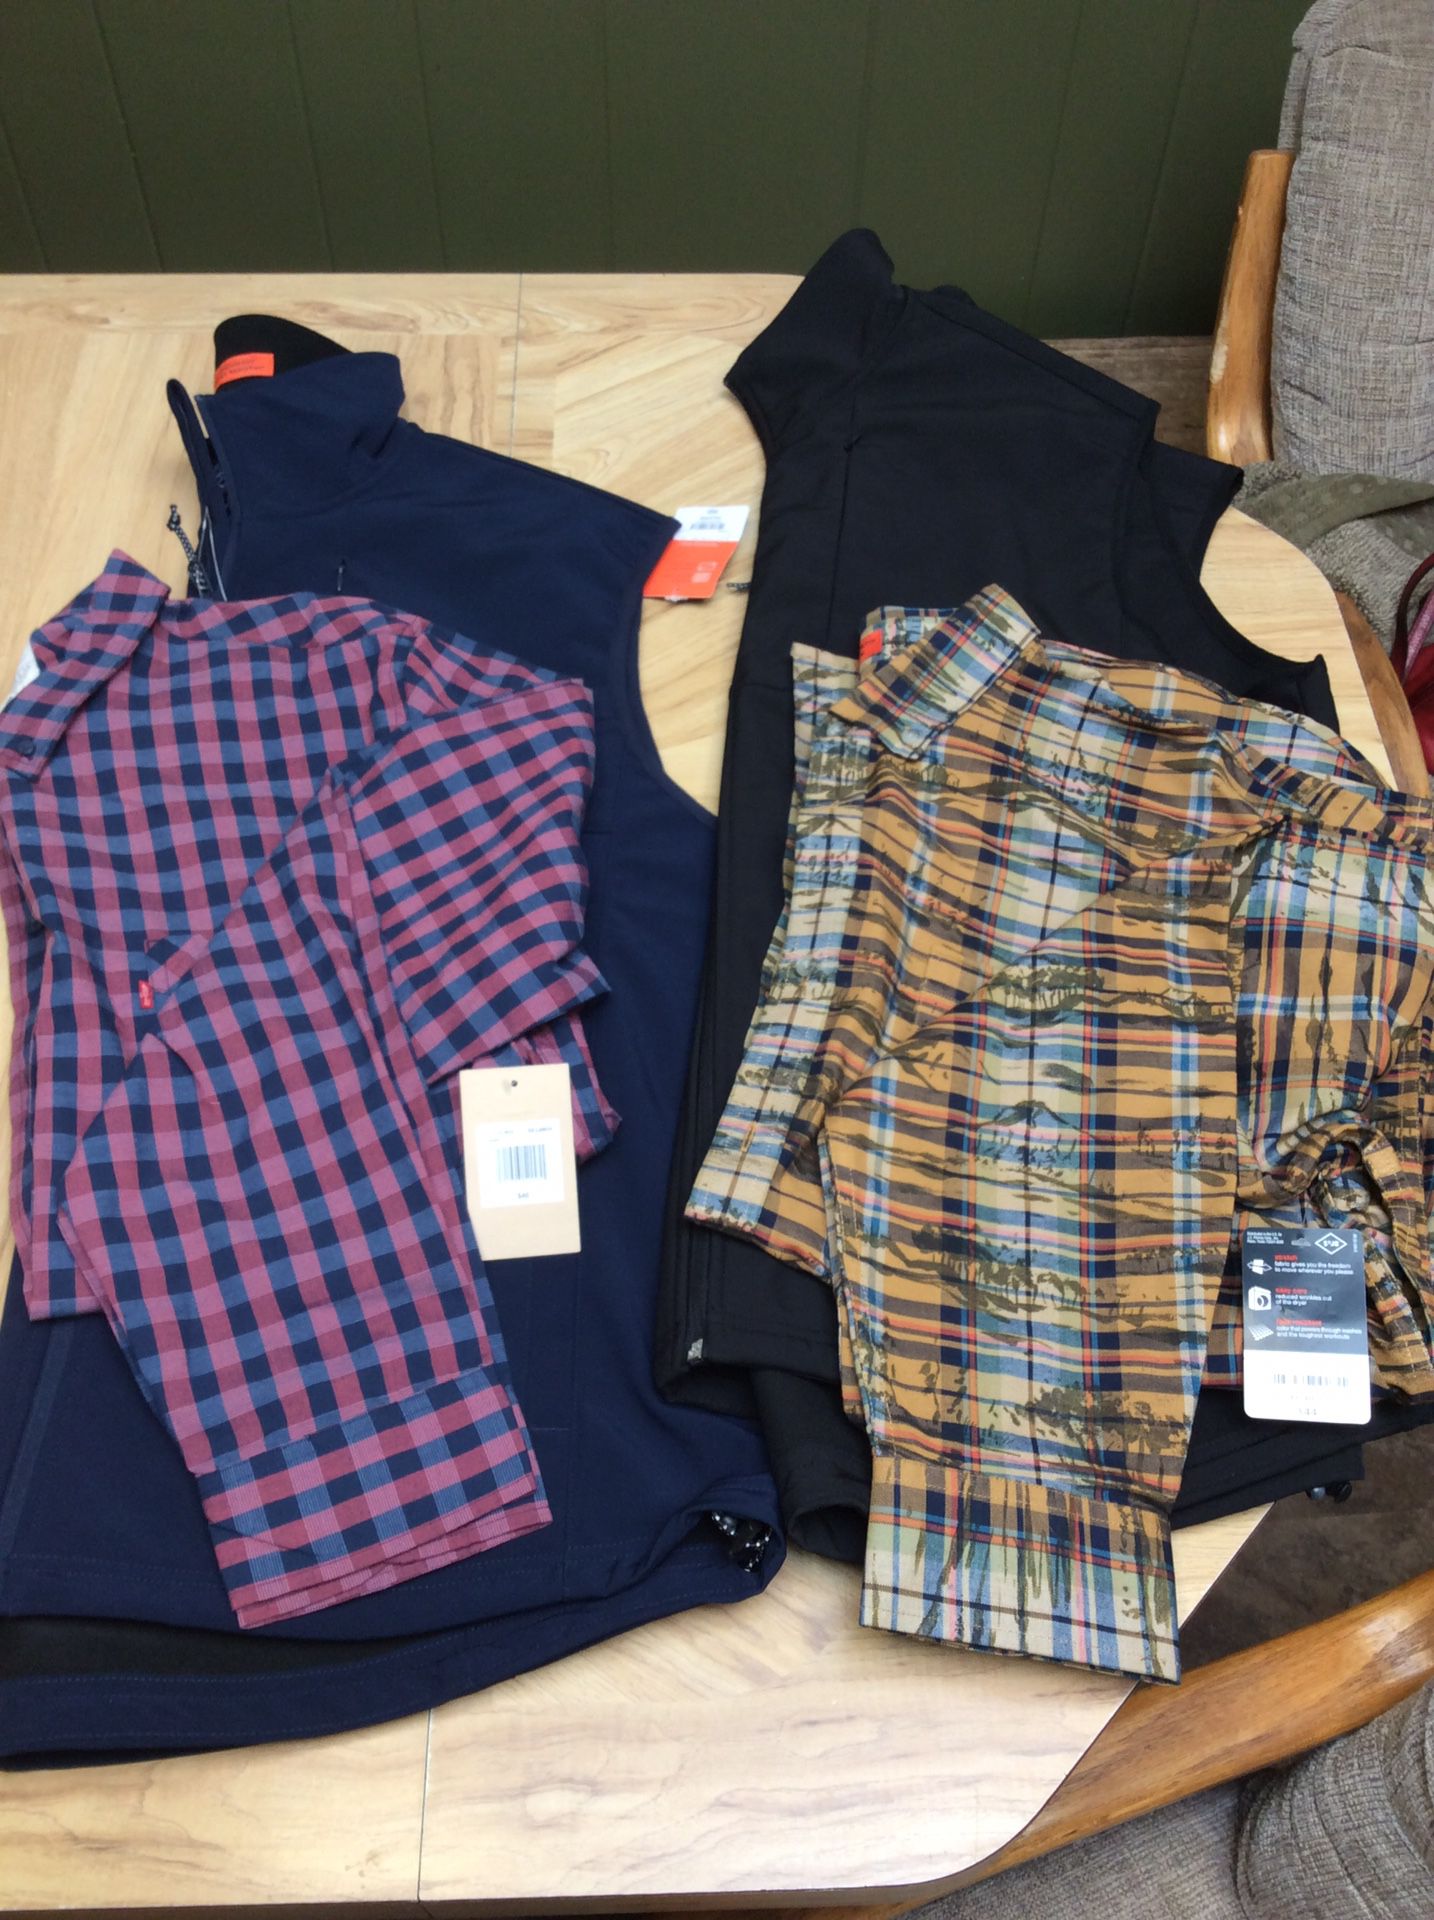 Brand New St. John’s Bay vests and shirts, Levi’s shirt long sleeve $20 each, see description